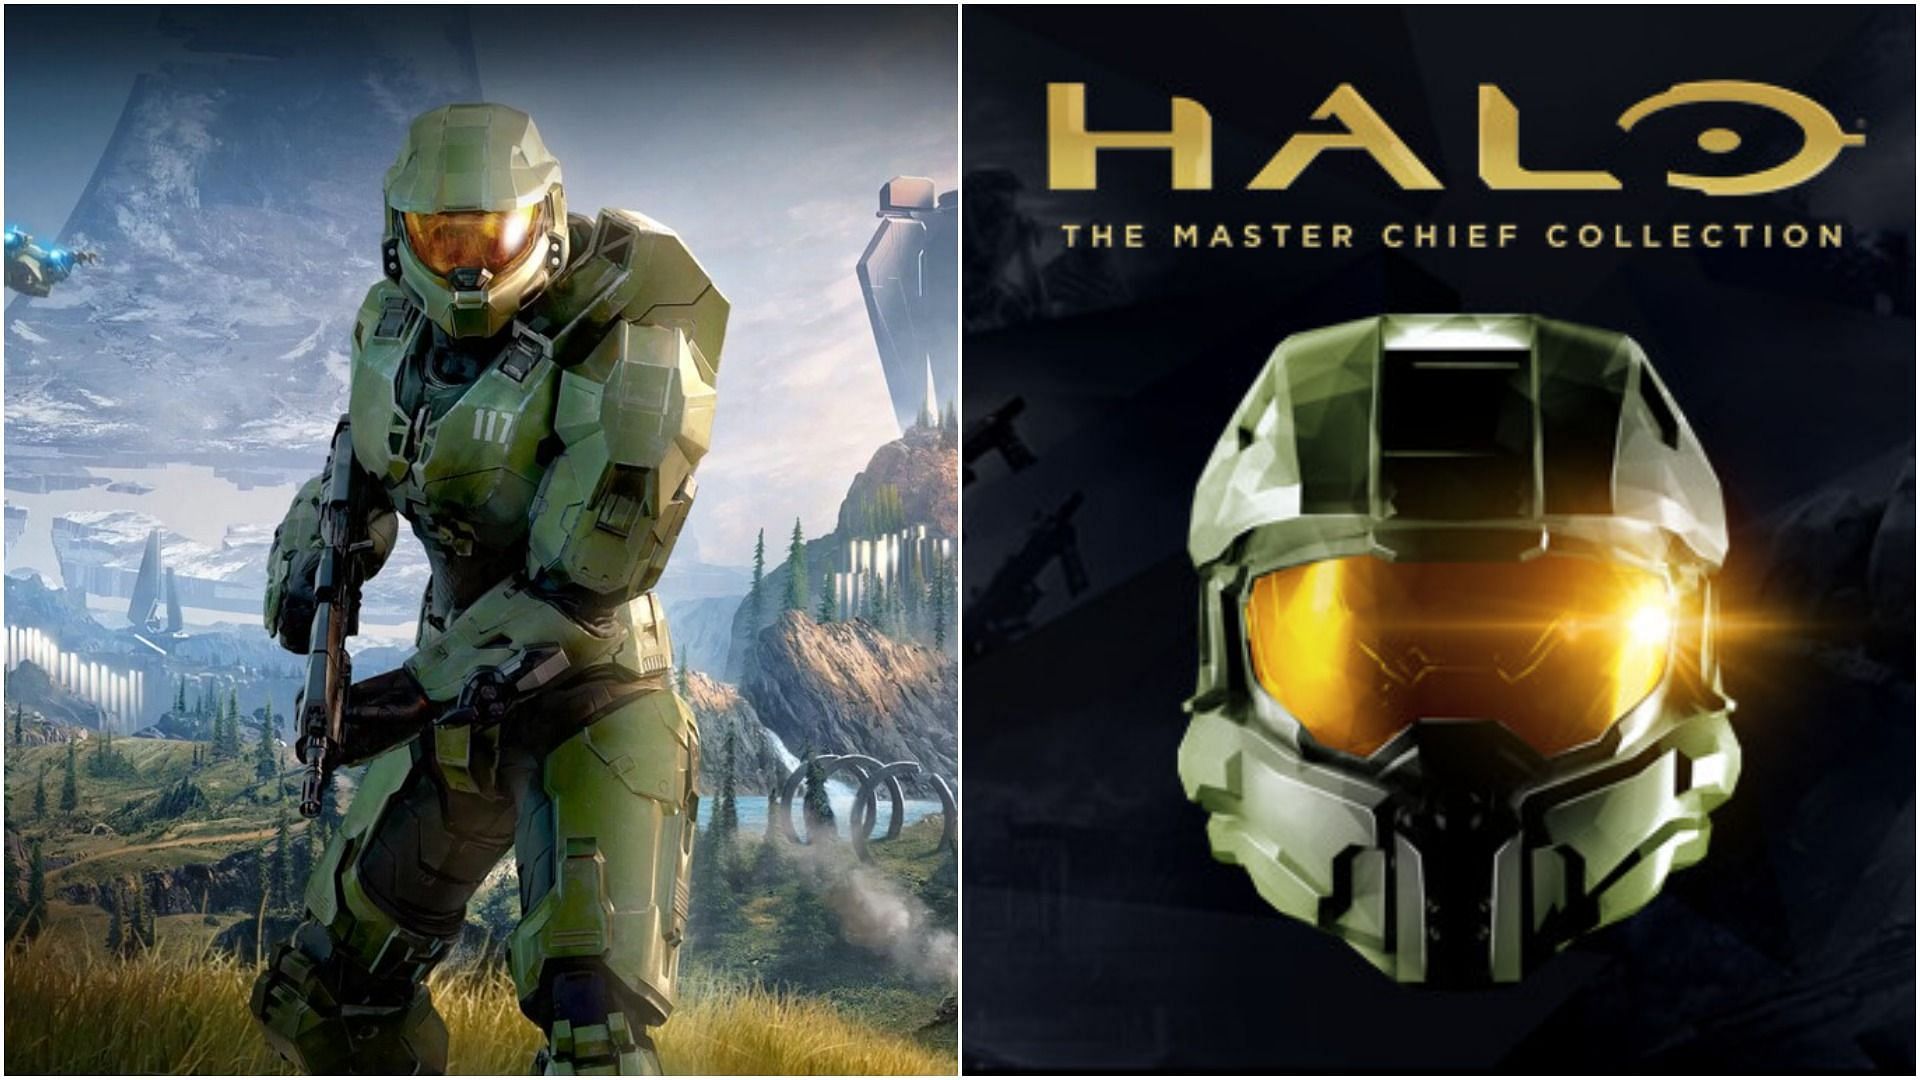 Halo: The Master Chief Collection - Game Overview